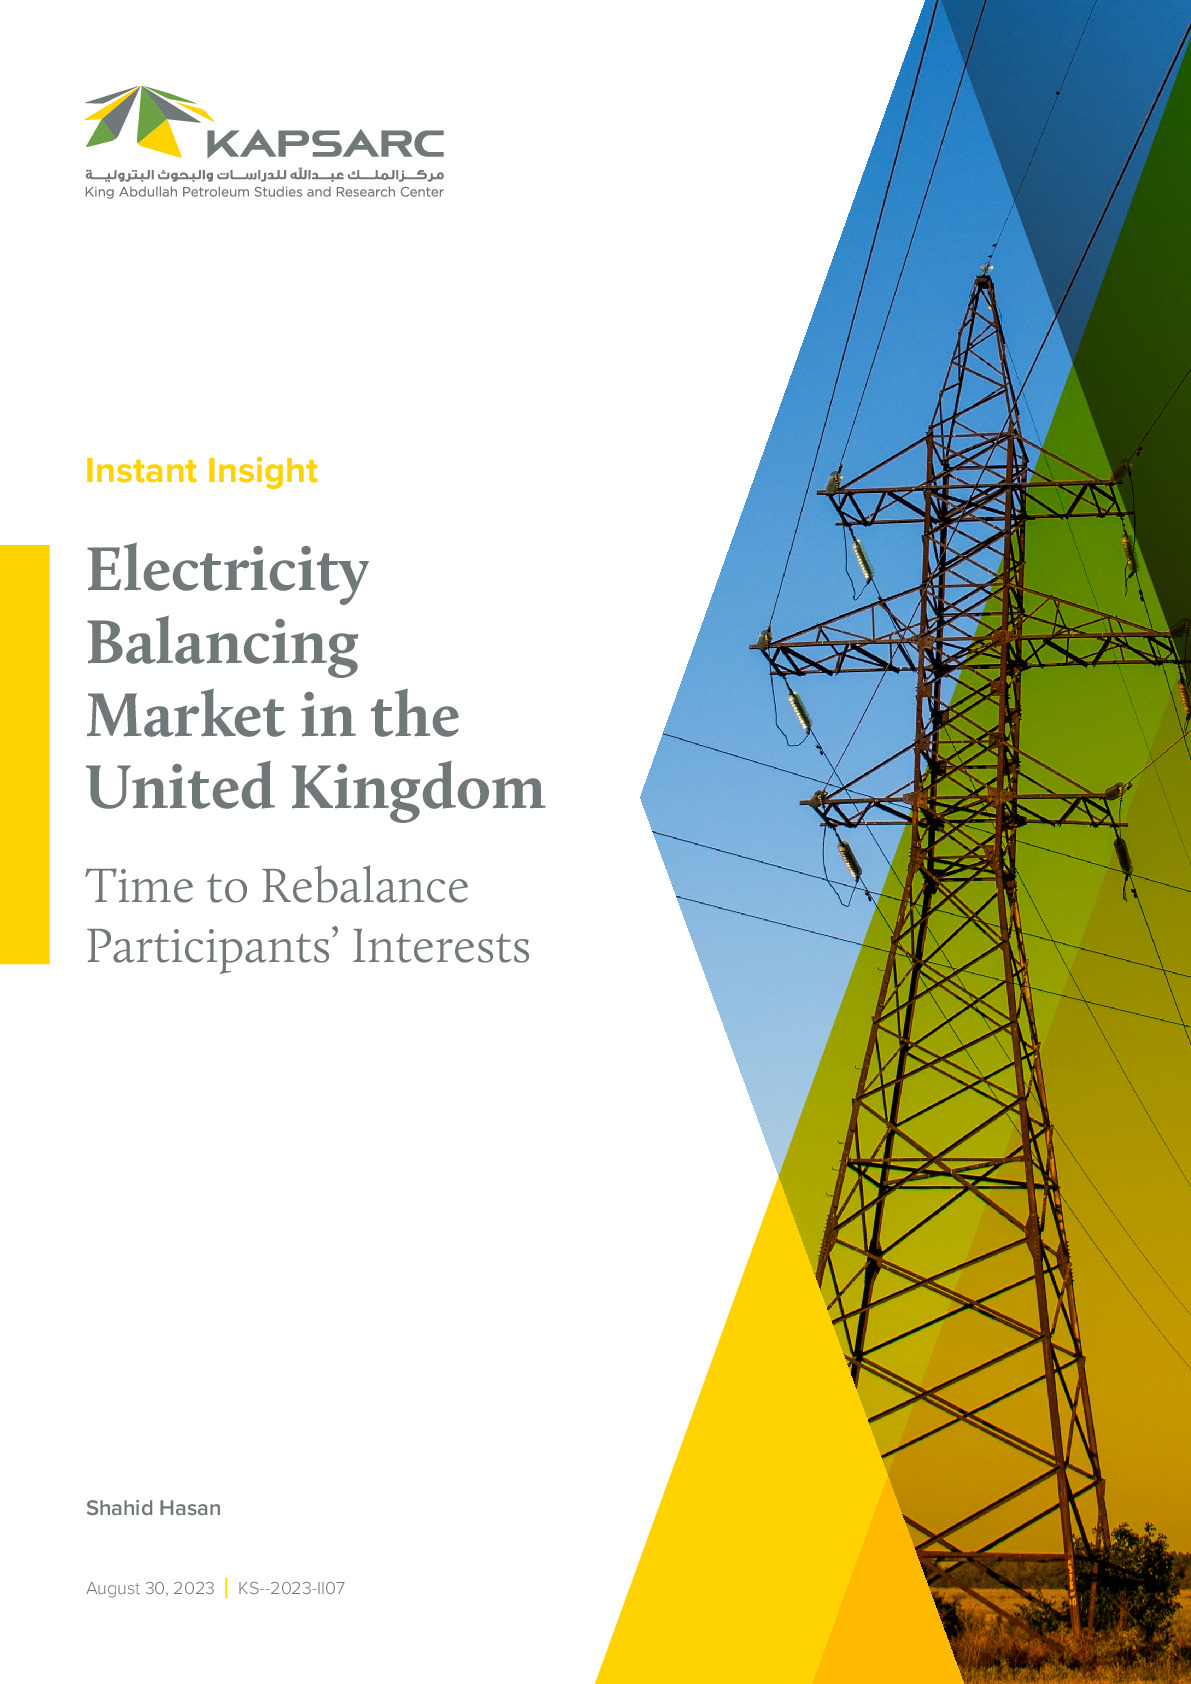 Electricity Balancing Market in the United Kingdom: Time to Rebalance Participants’ Interests